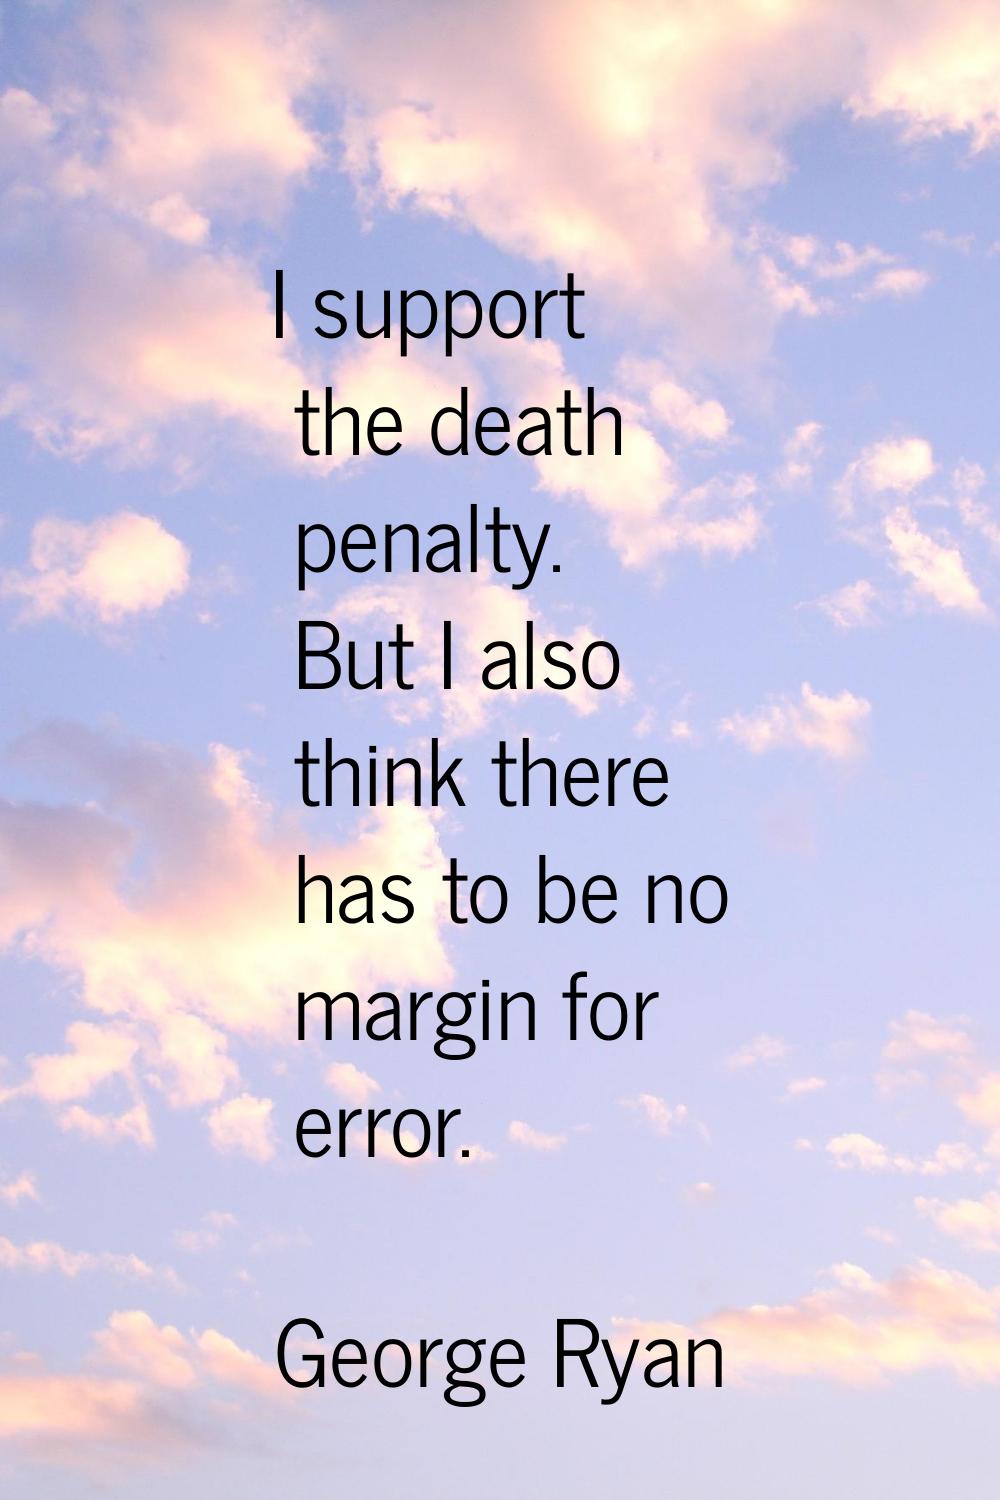 I support the death penalty. But I also think there has to be no margin for error.